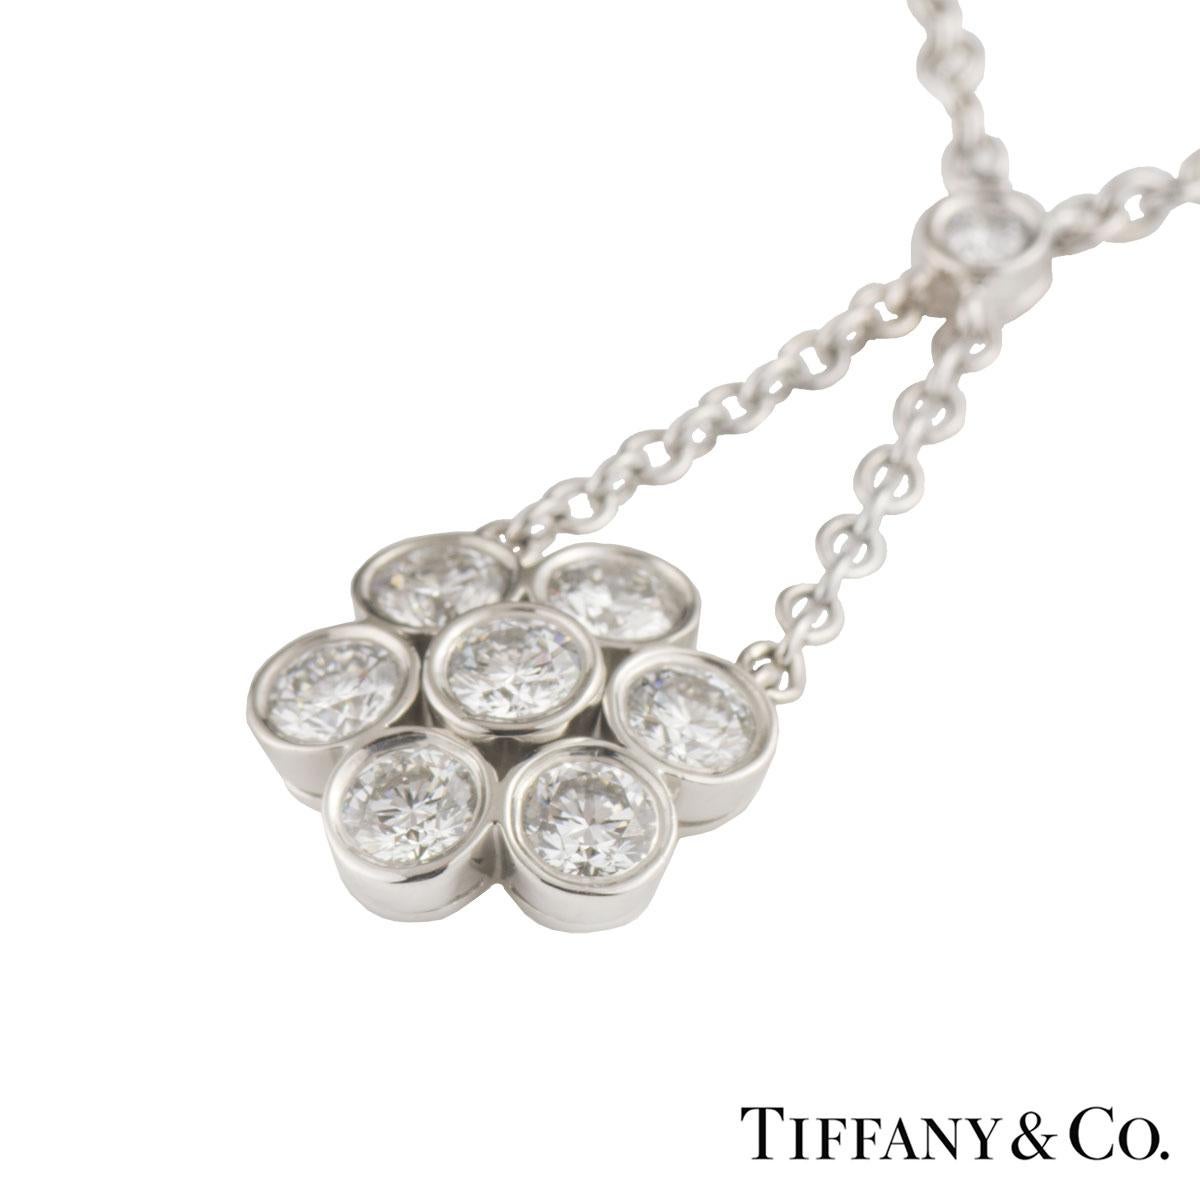 A beautiful platinum diamond Tiffany & Co. pendant from the Enchant collection. The pendant comprises of a flower motif with 7 round brilliant cut diamonds accentuated with two chains joining another round brilliant cut diamond in a rubover setting.